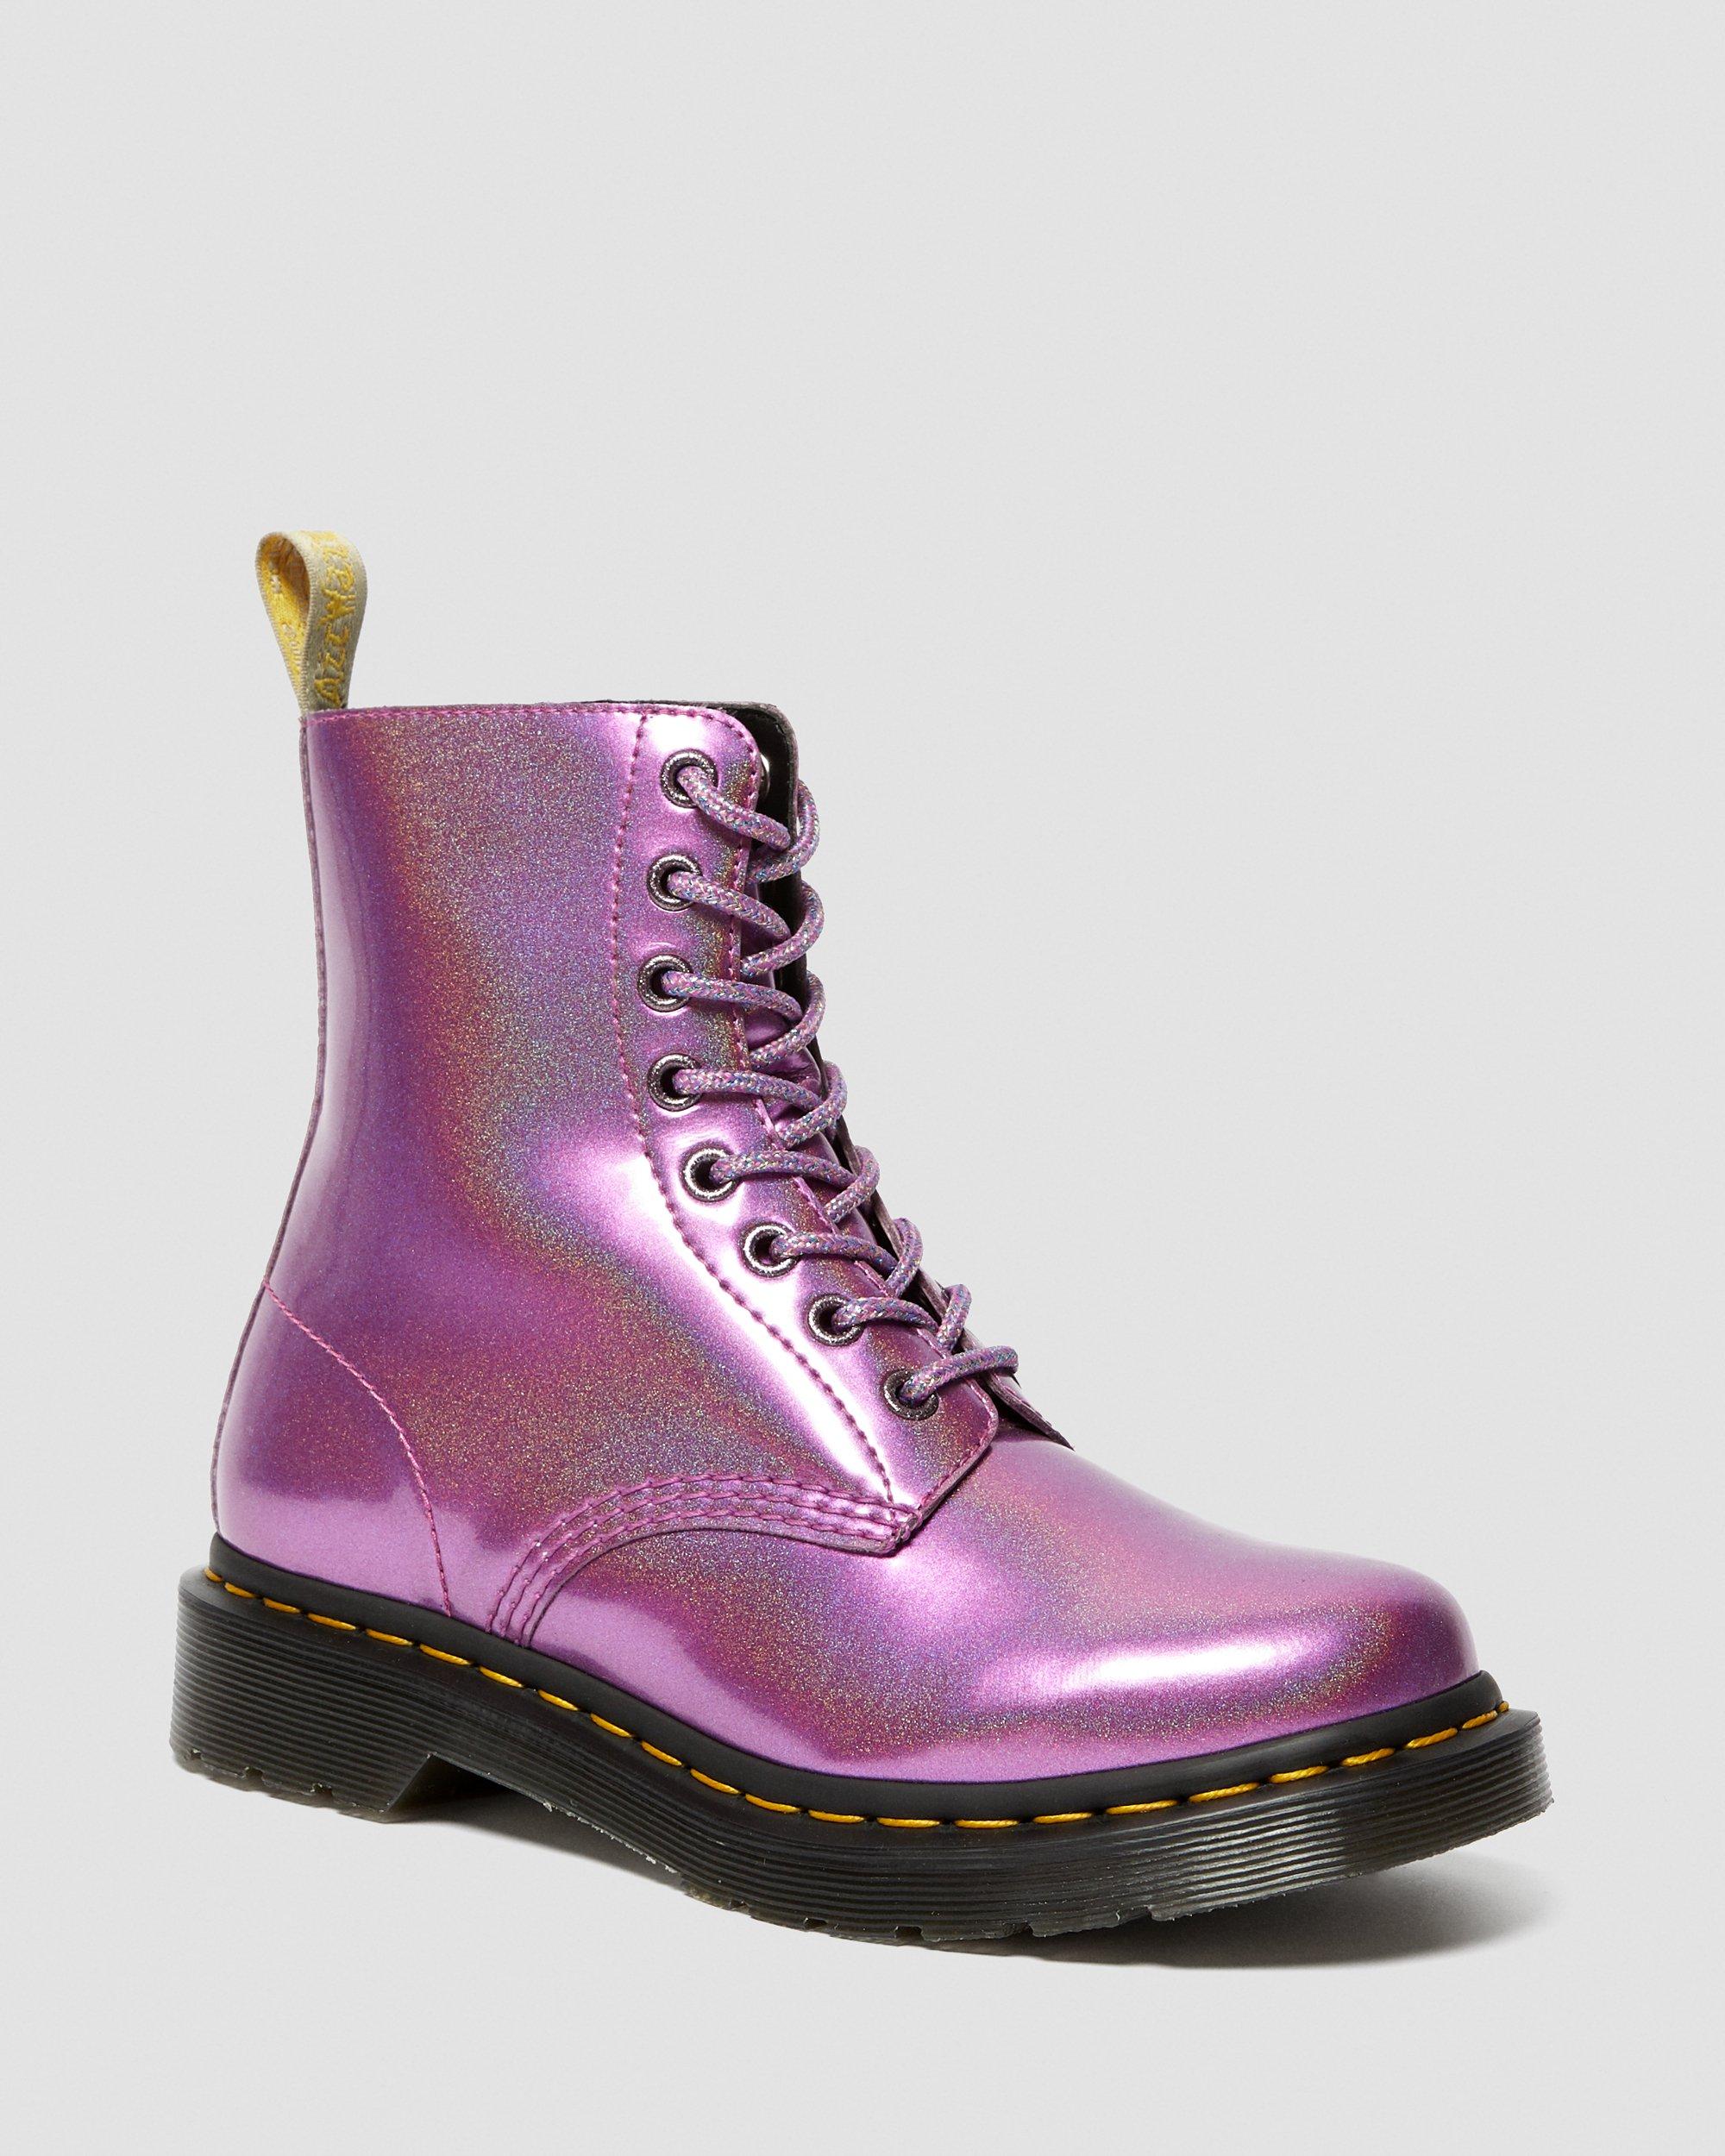 black and pink doc martens